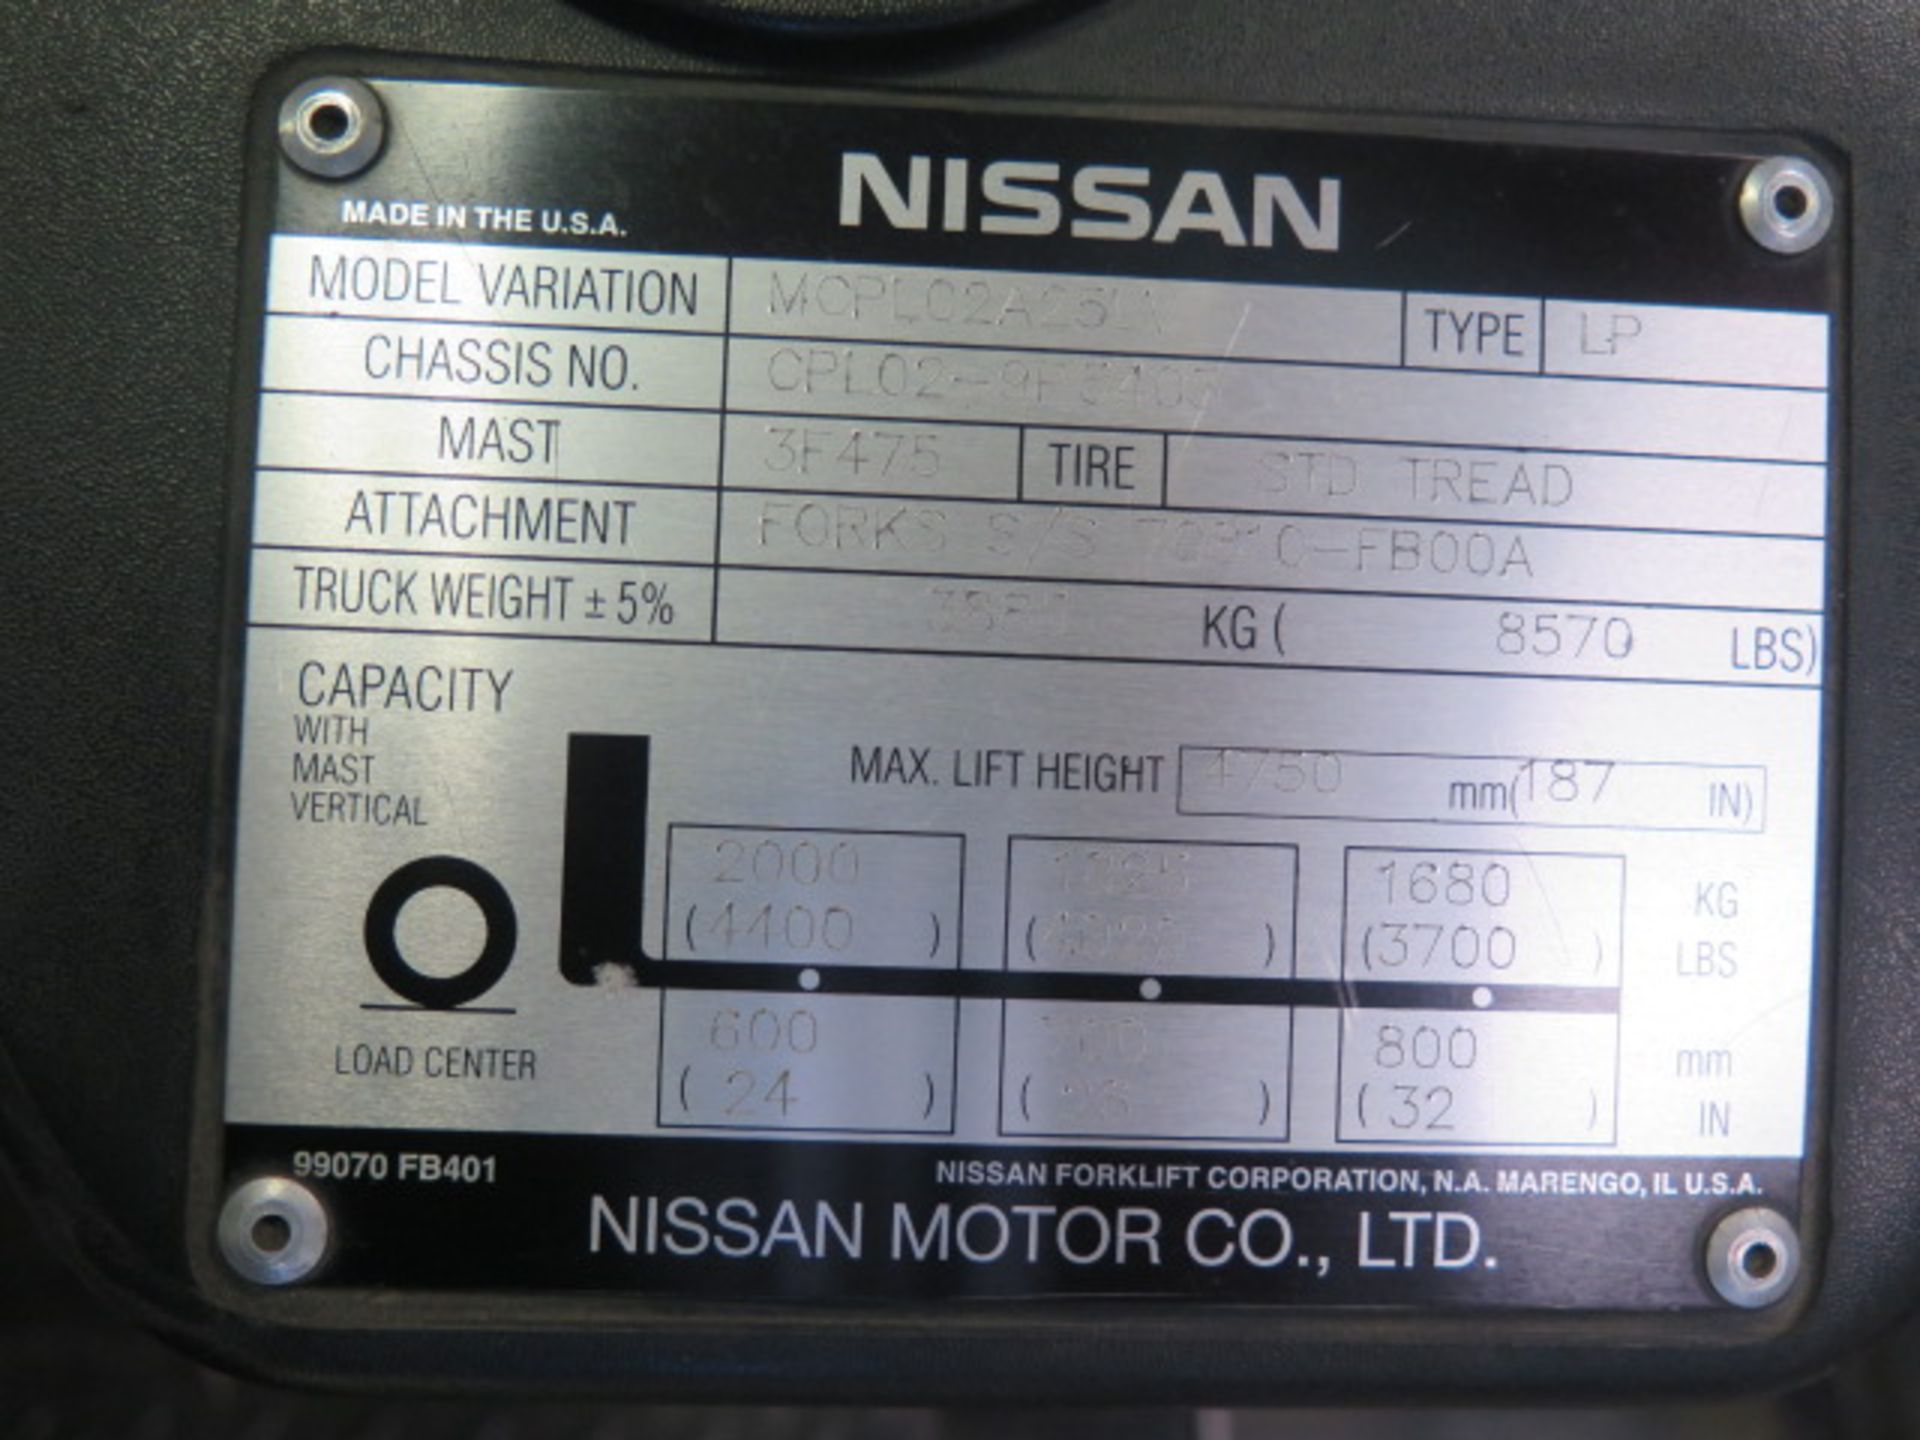 Nissan MCPL02A25LV 4400 :Lb Cap LPG Forklift s/n CPL02-9P5403 w/ 3-Stage Mast, 187" Lift Height - Image 10 of 10